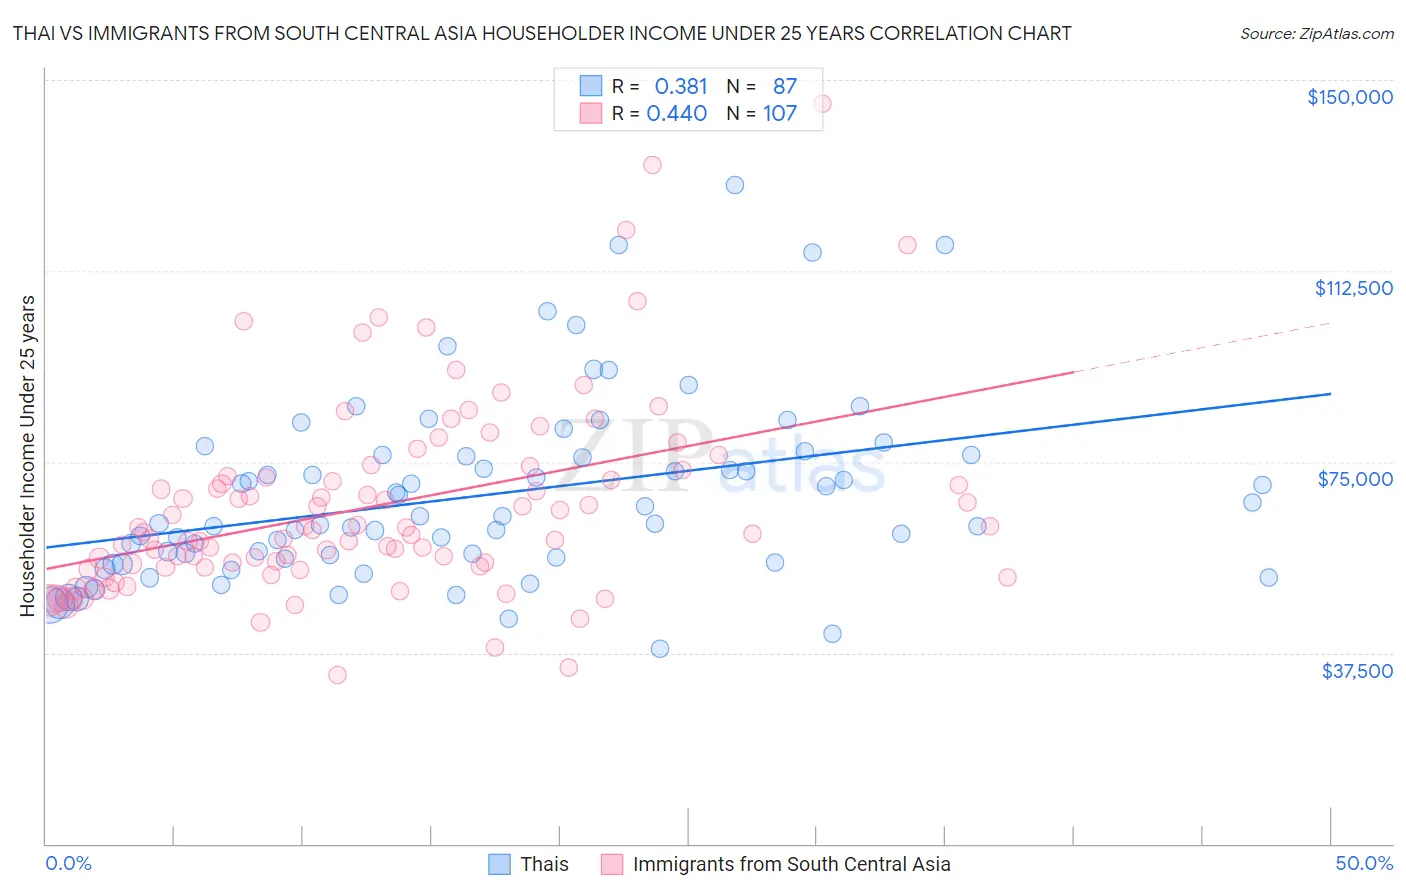 Thai vs Immigrants from South Central Asia Householder Income Under 25 years